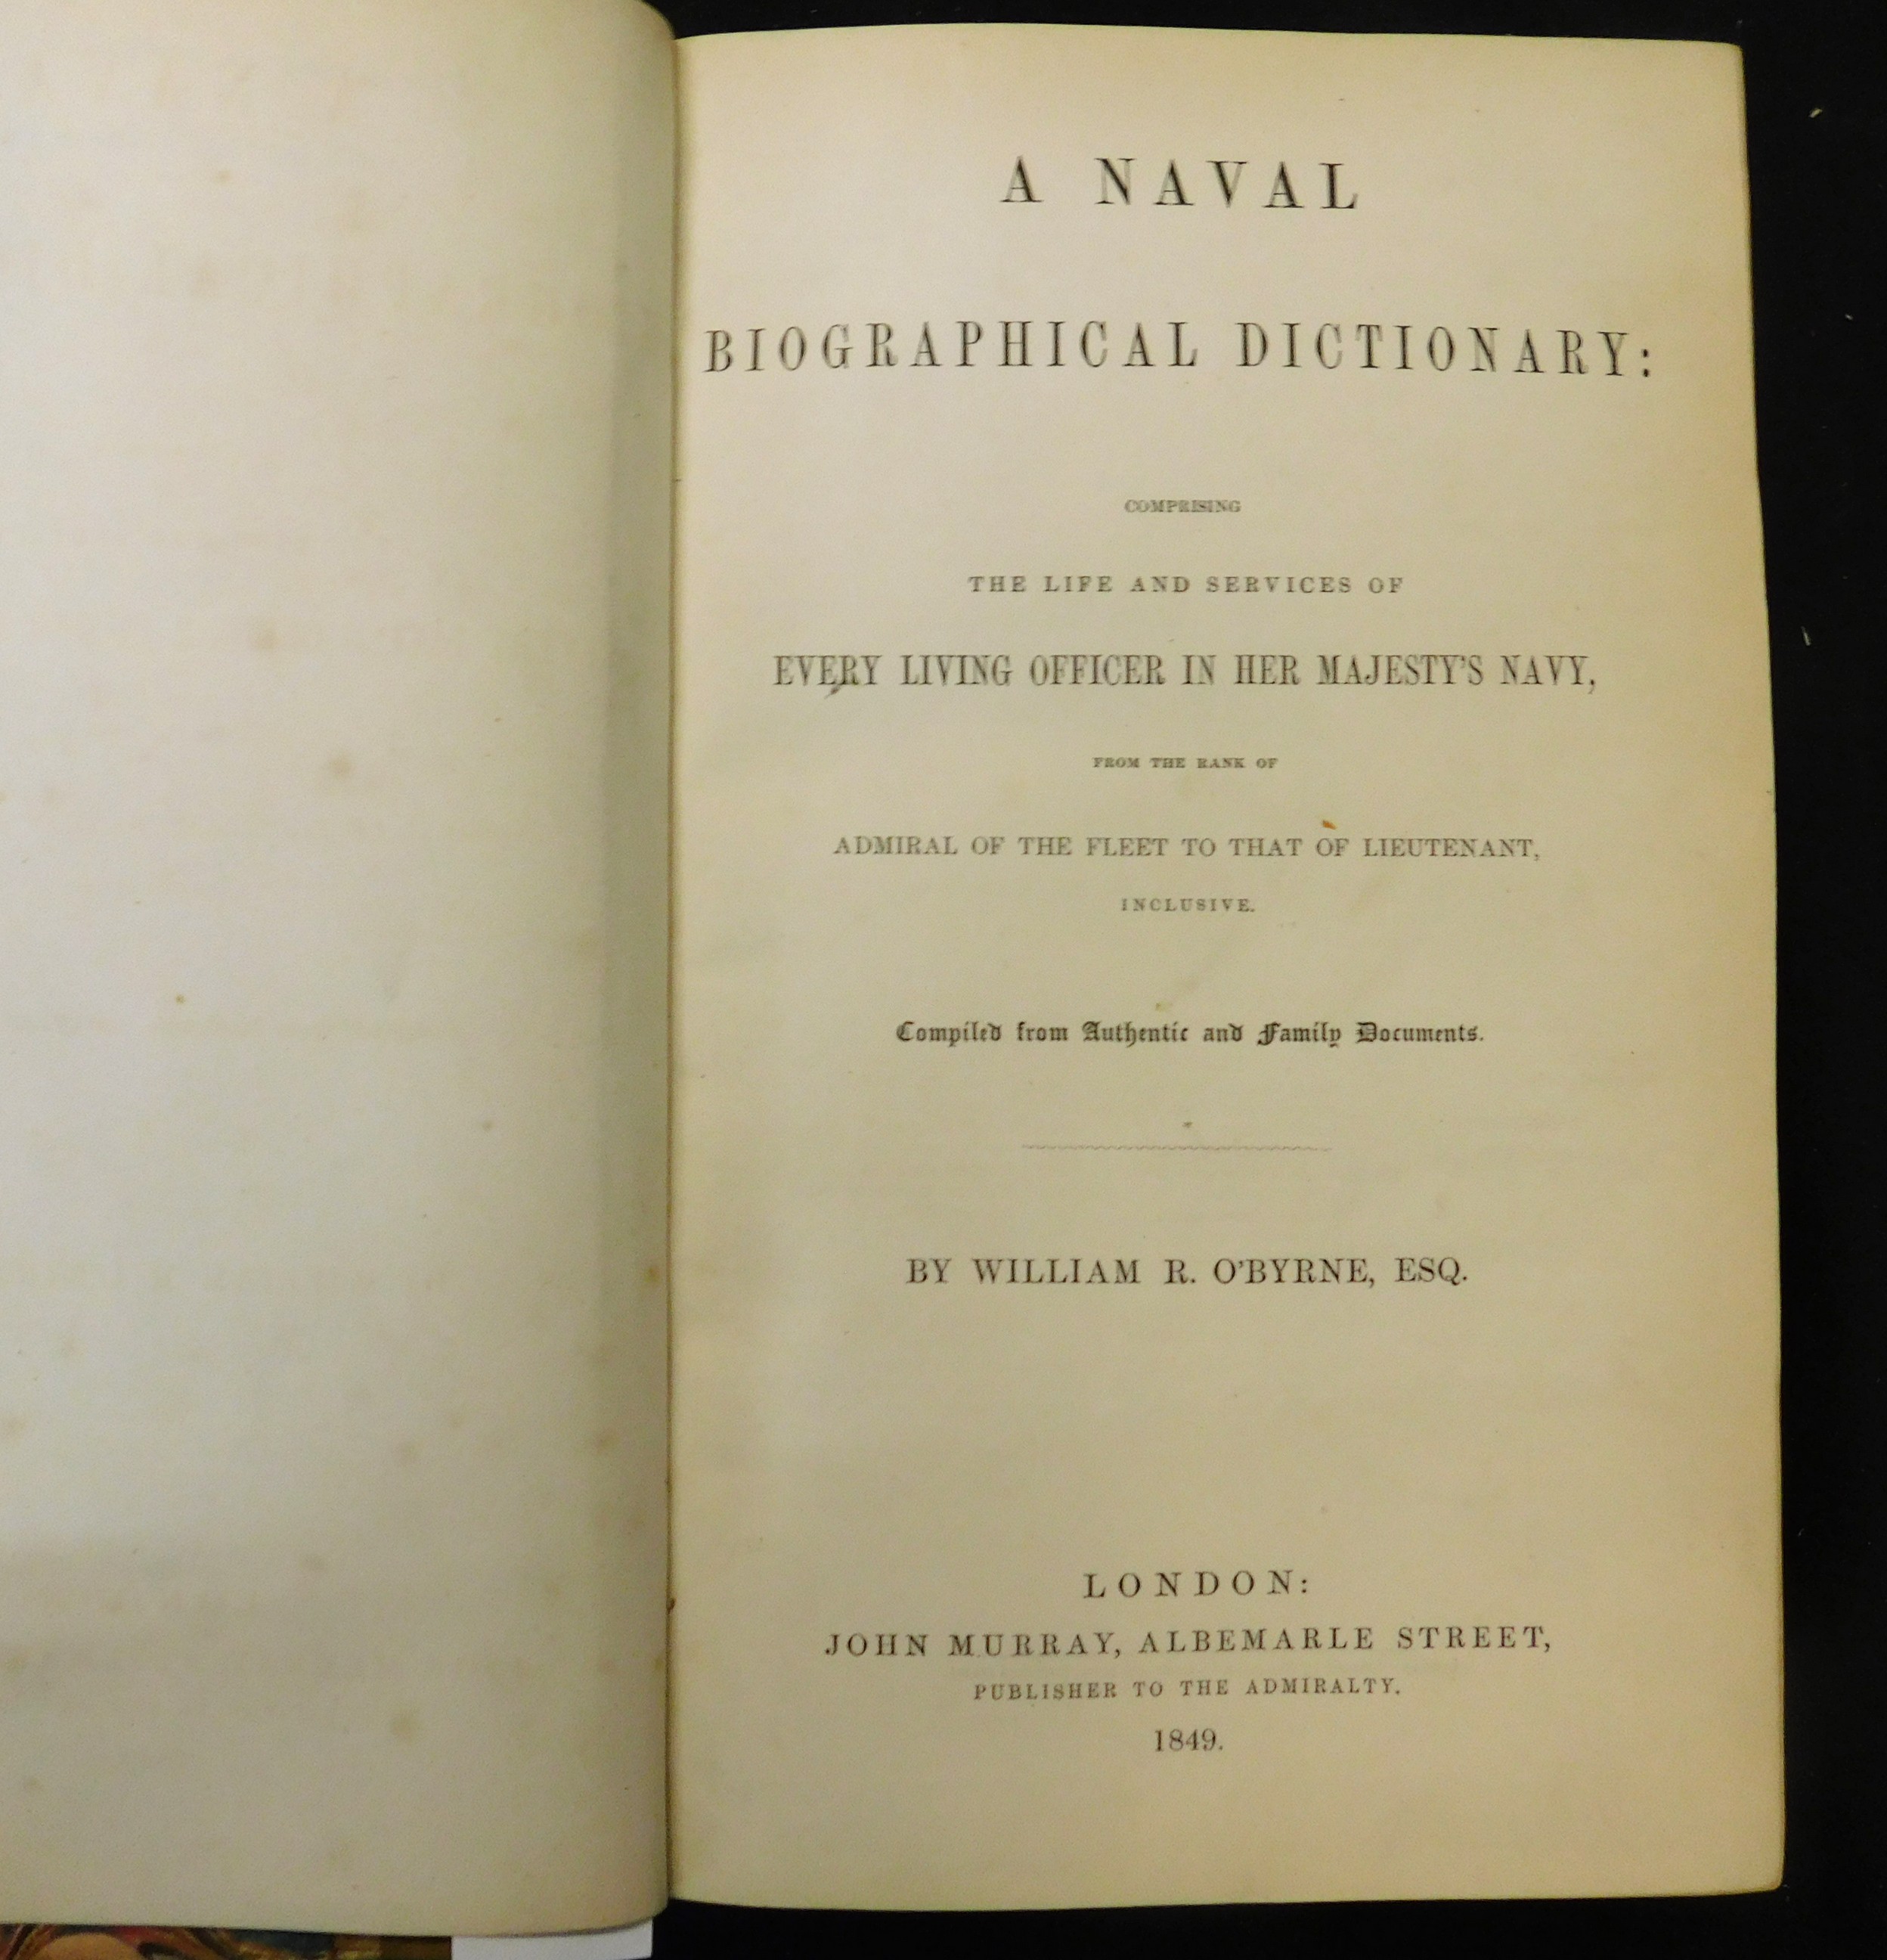 WILLIAM RICHARD O'BYRNE: A NAVAL BIOGRAPHICAL DICTIONARY COMPRISING THE LIFE AND SERVICES OF EVERY